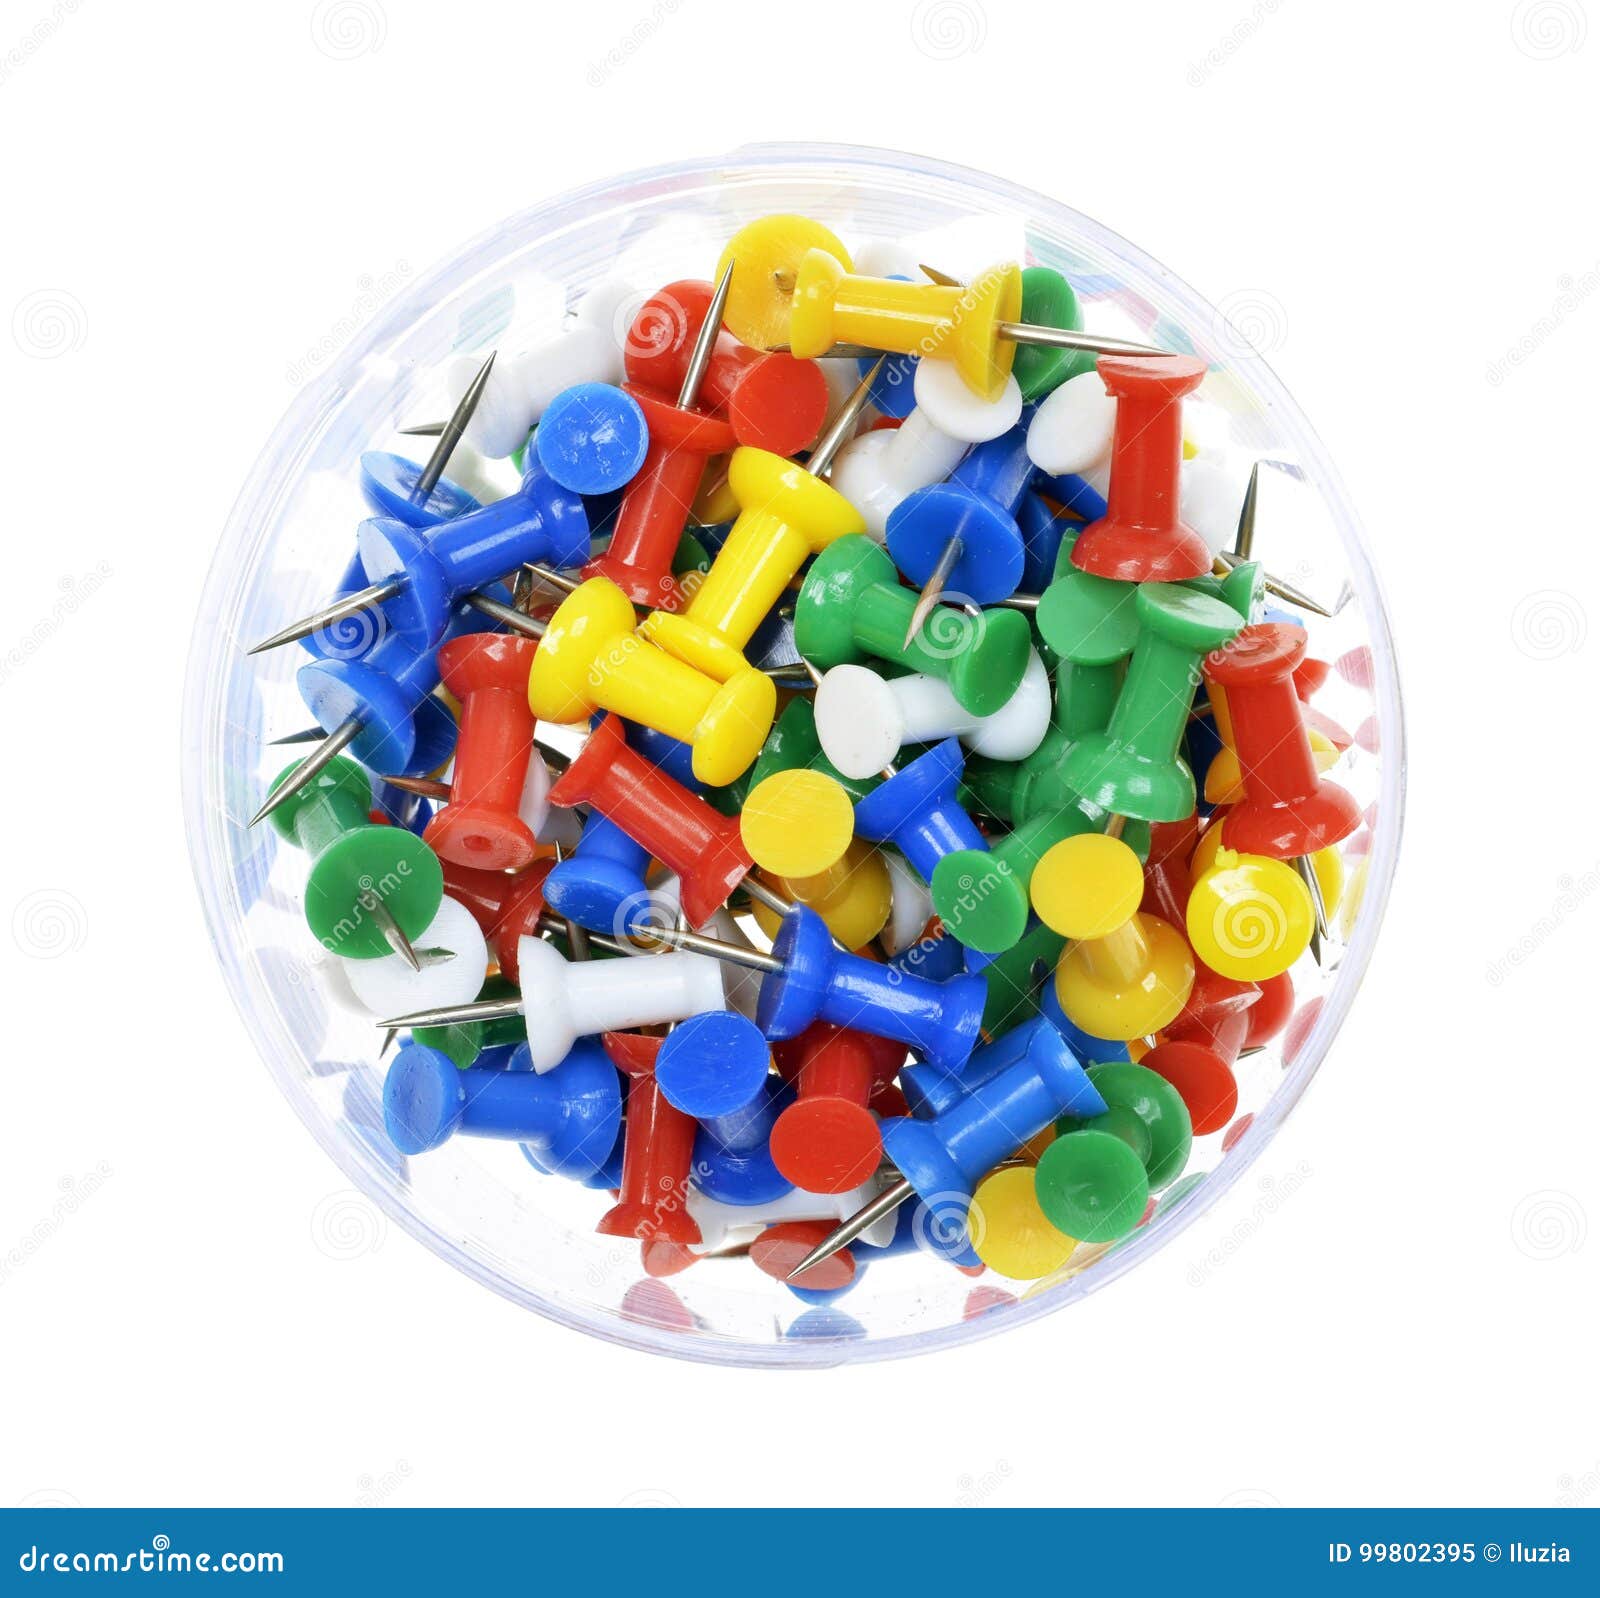 Pile of colorful push pins stock image. Image of equipment - 99802395